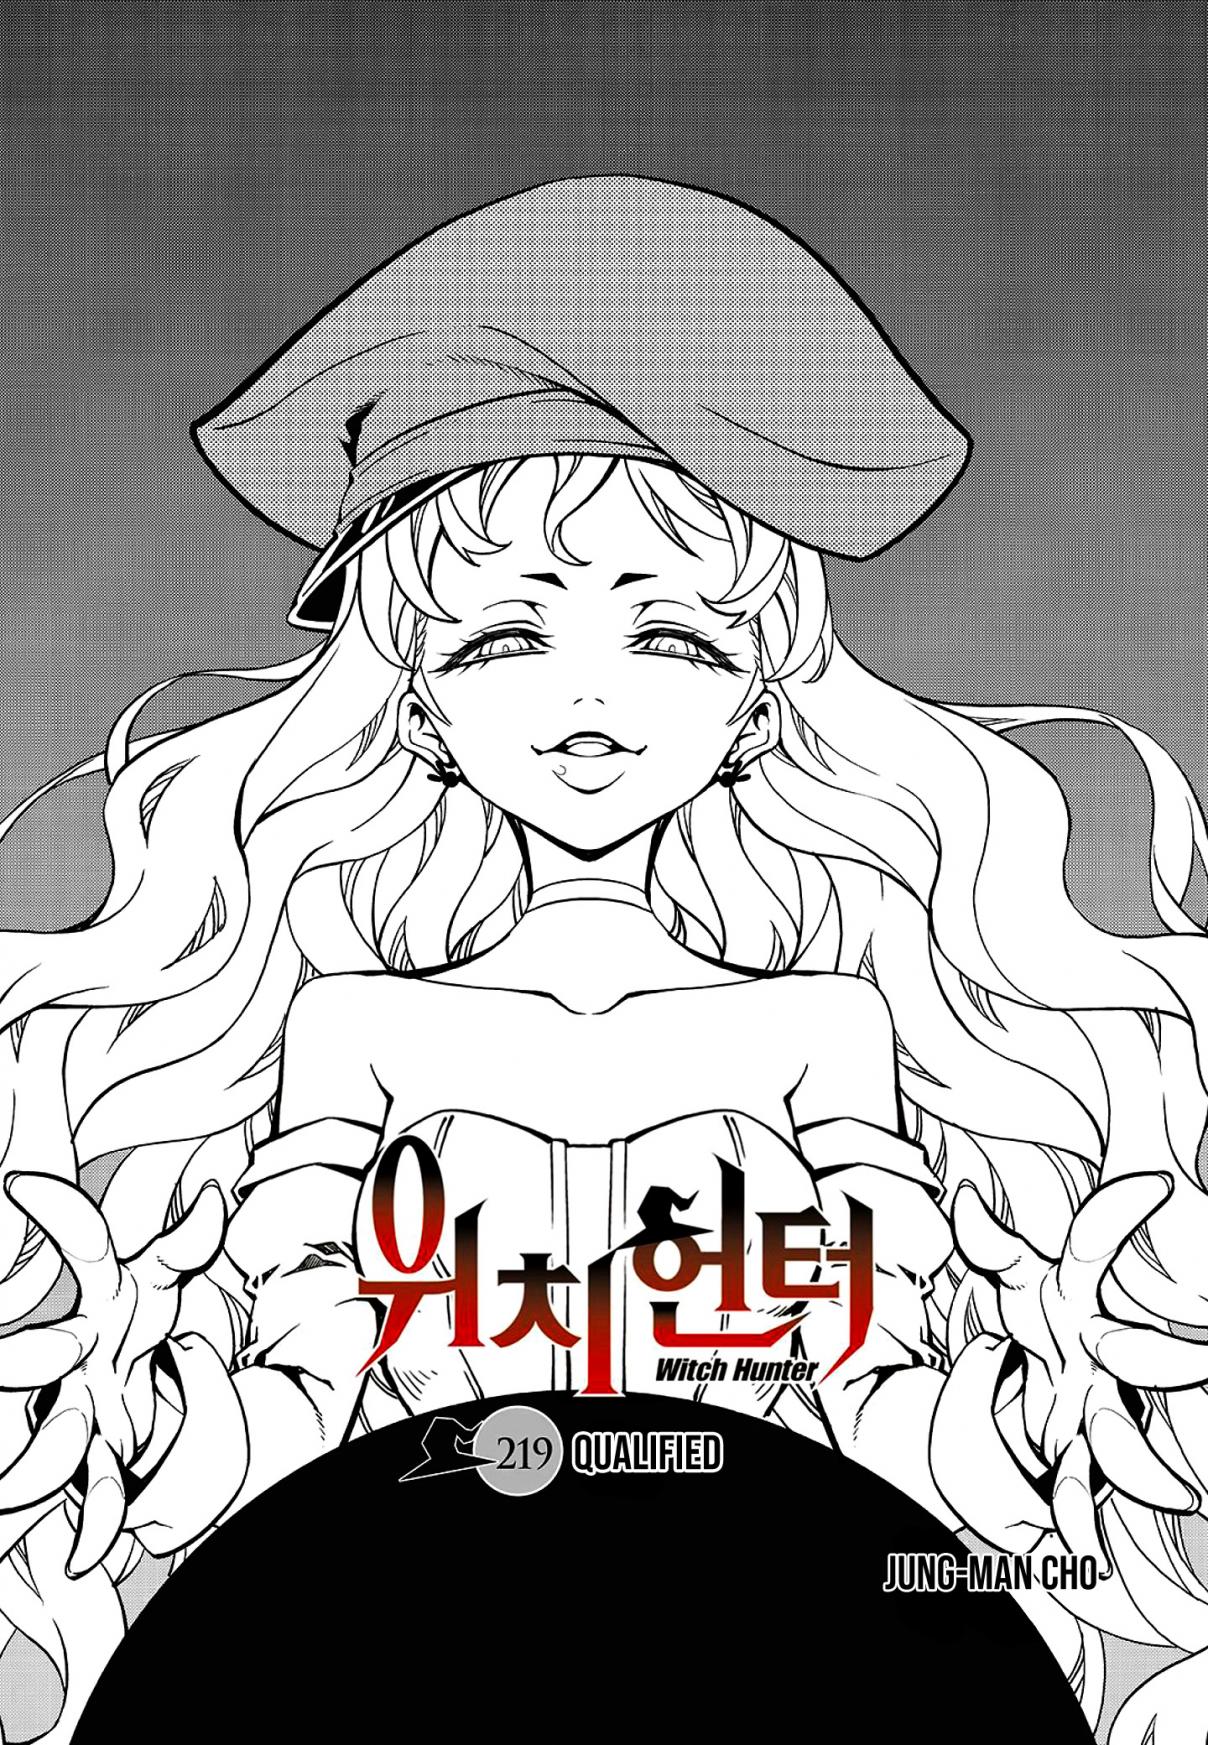 Witch Hunter Ch. 219 Qualified